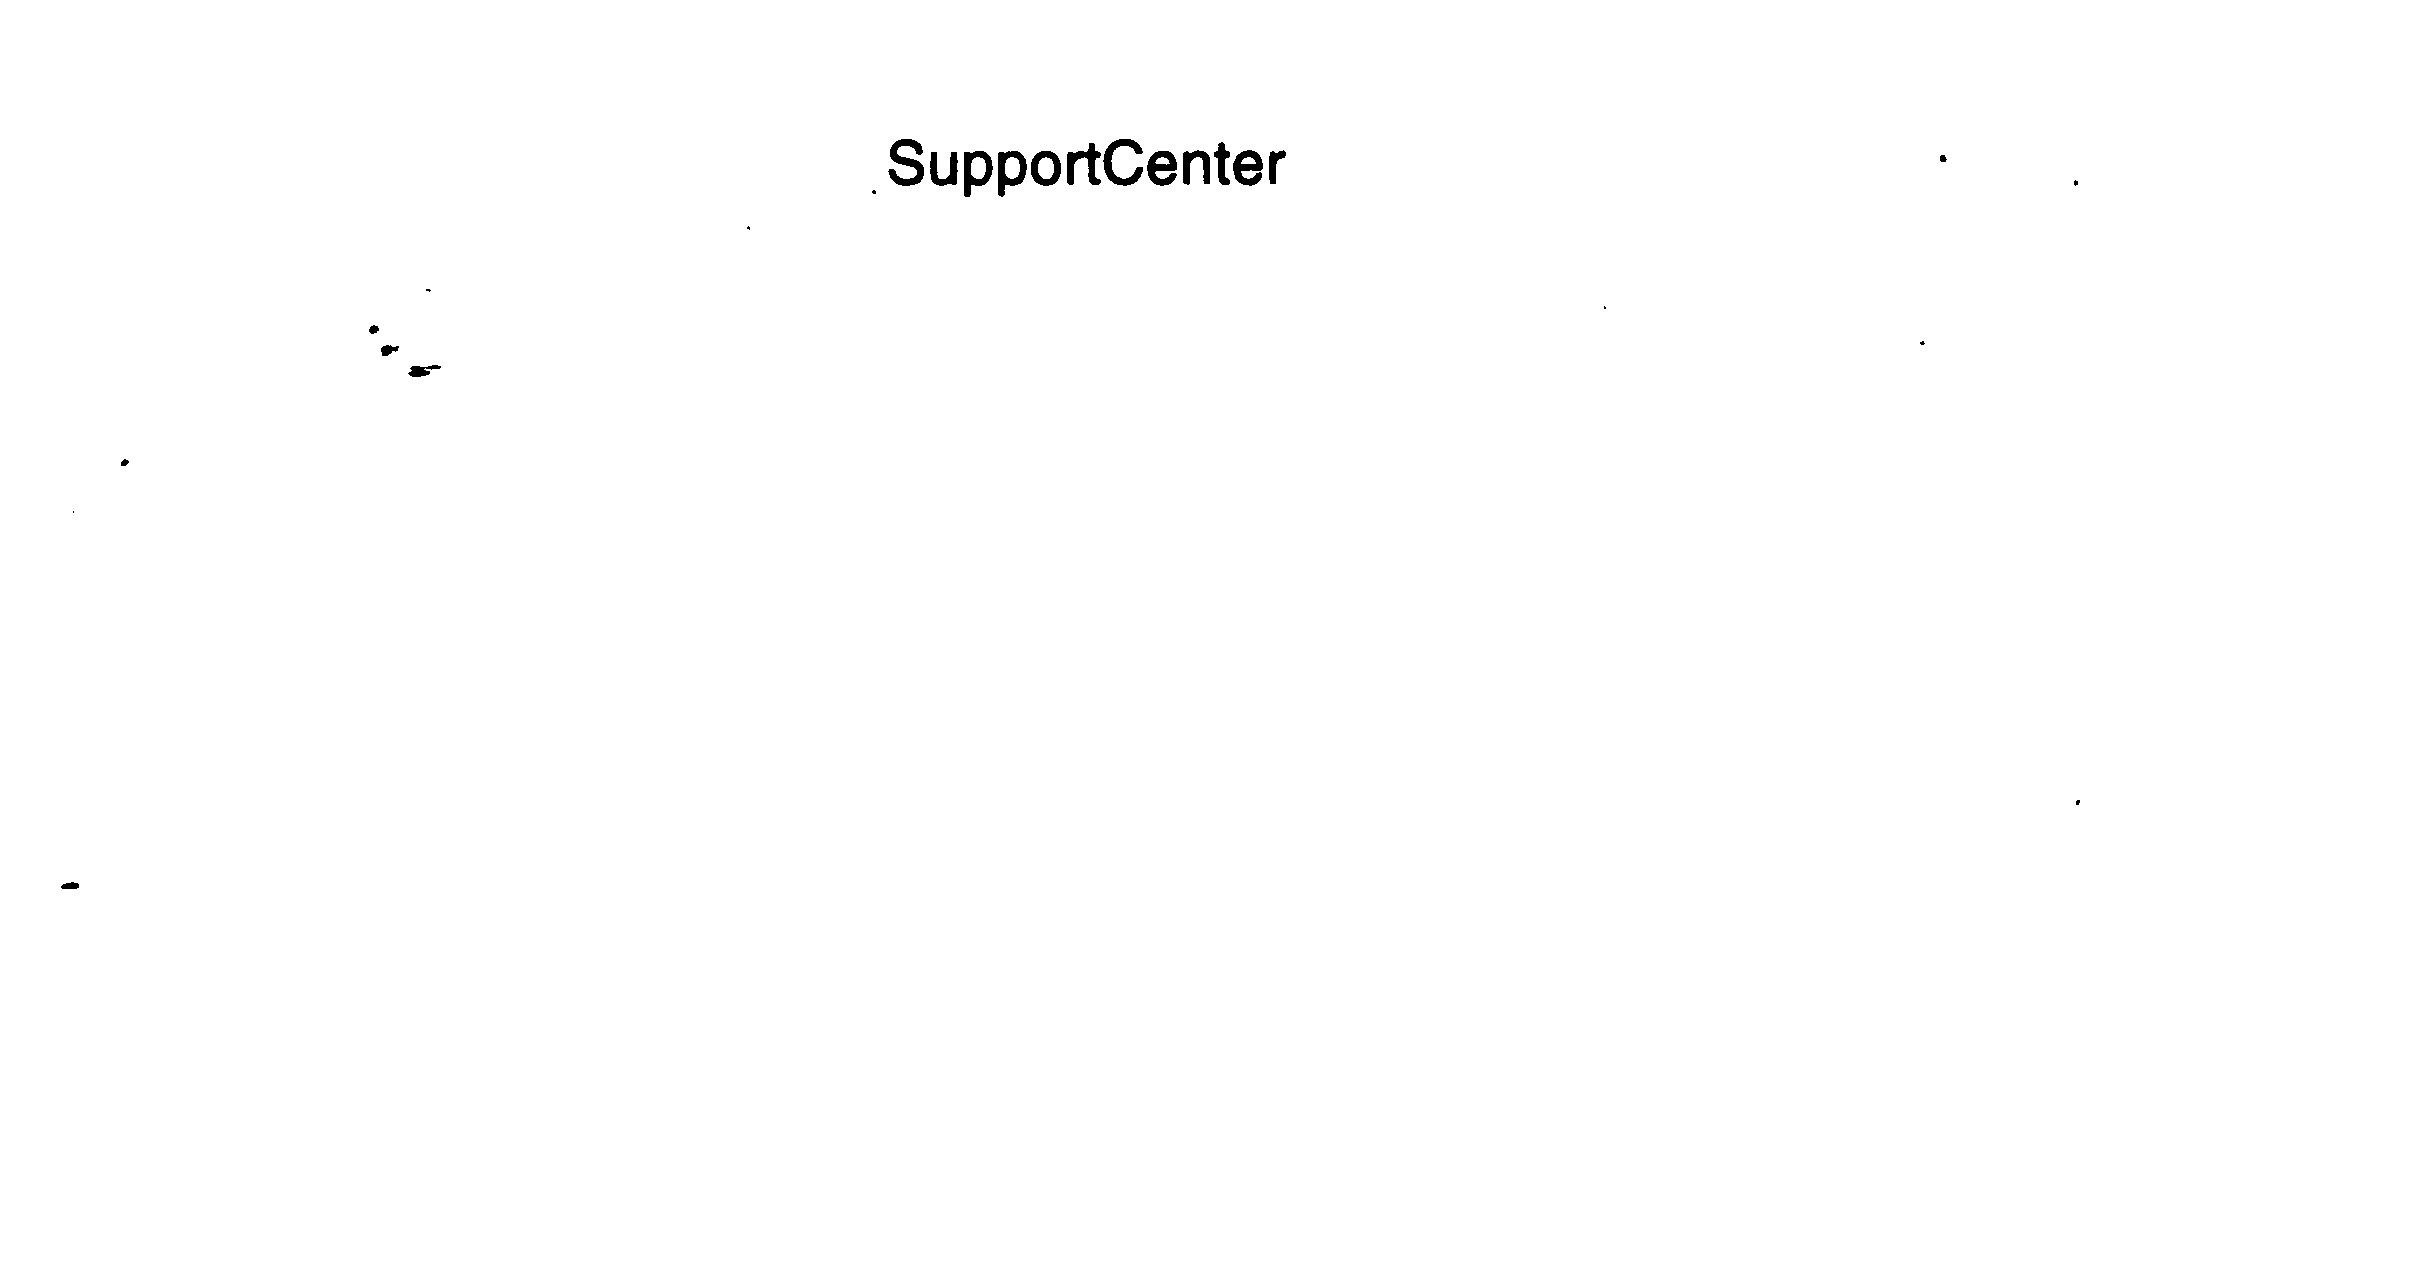 SUPPORTCENTER